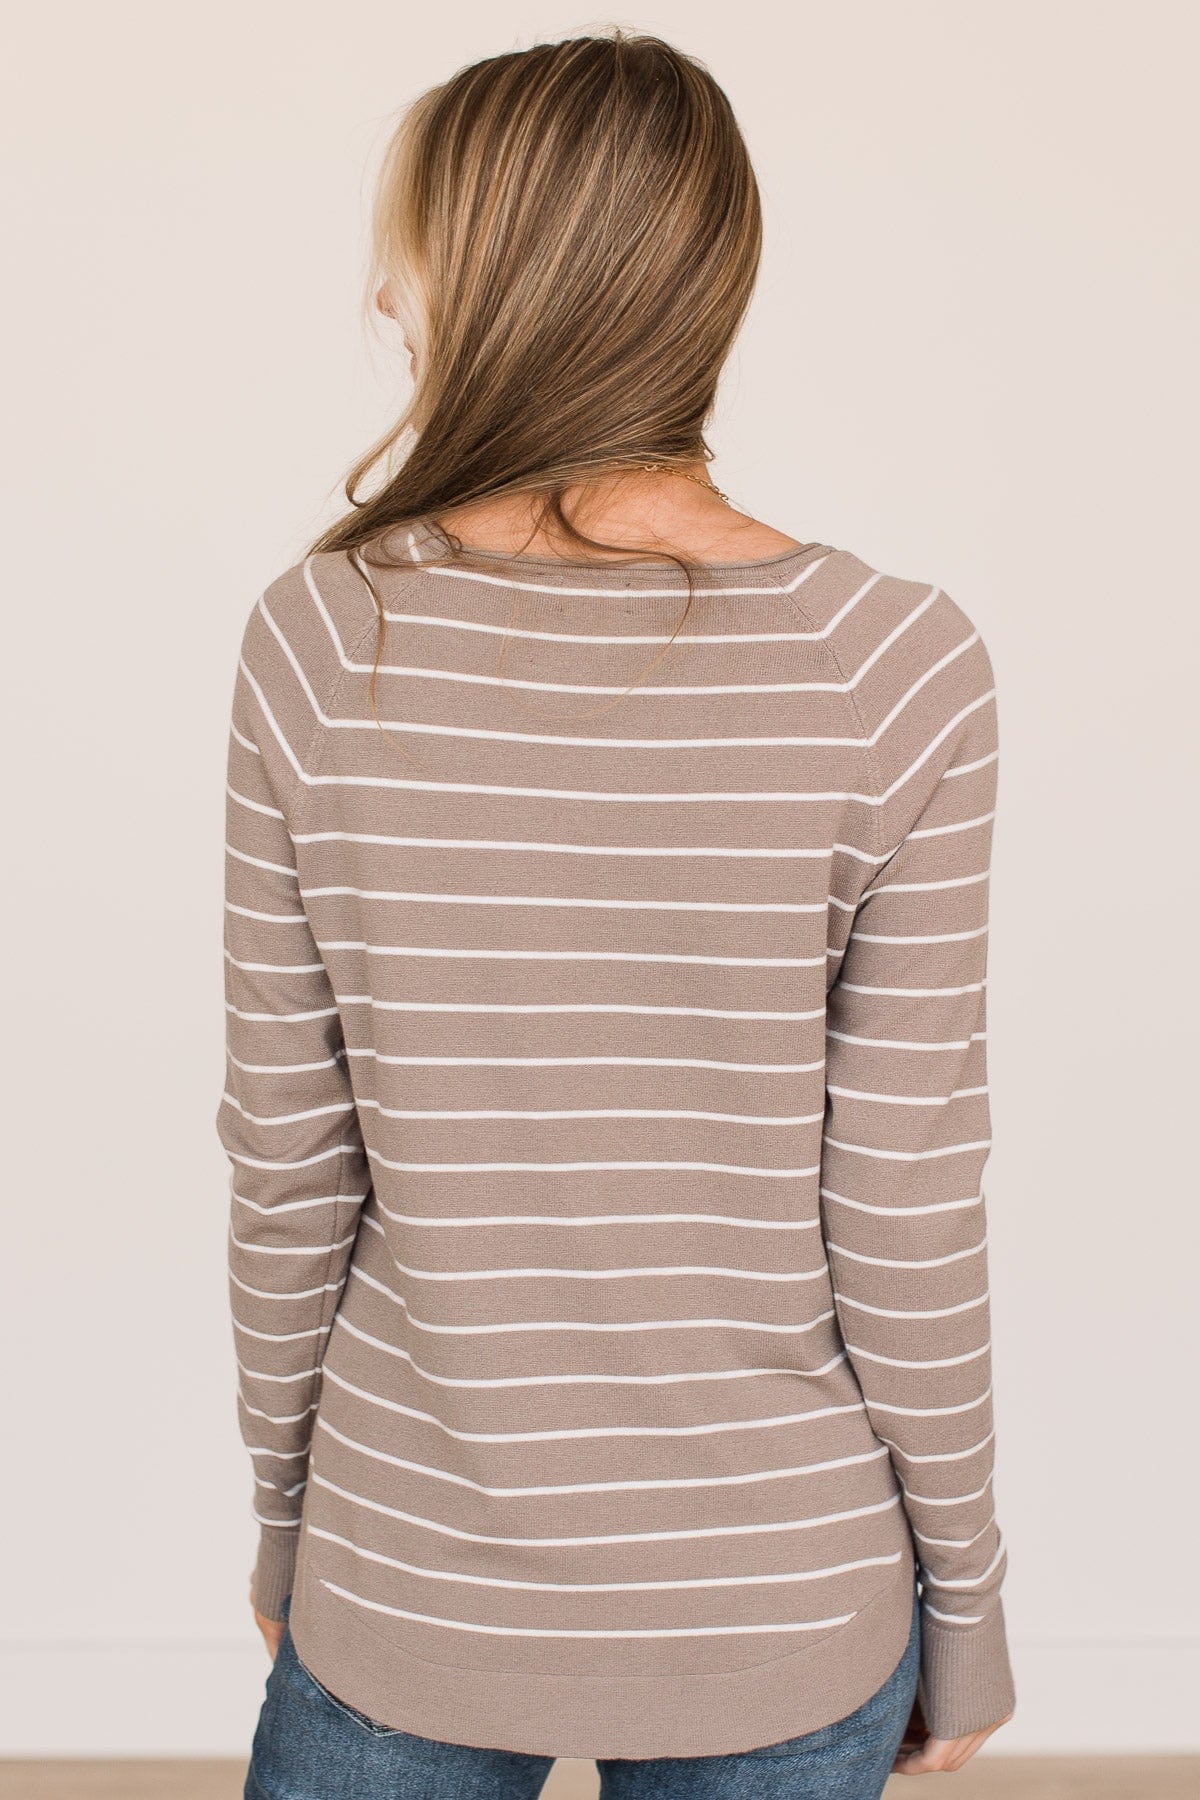 Days Like These Striped Knit Sweater- Taupe & Ivory